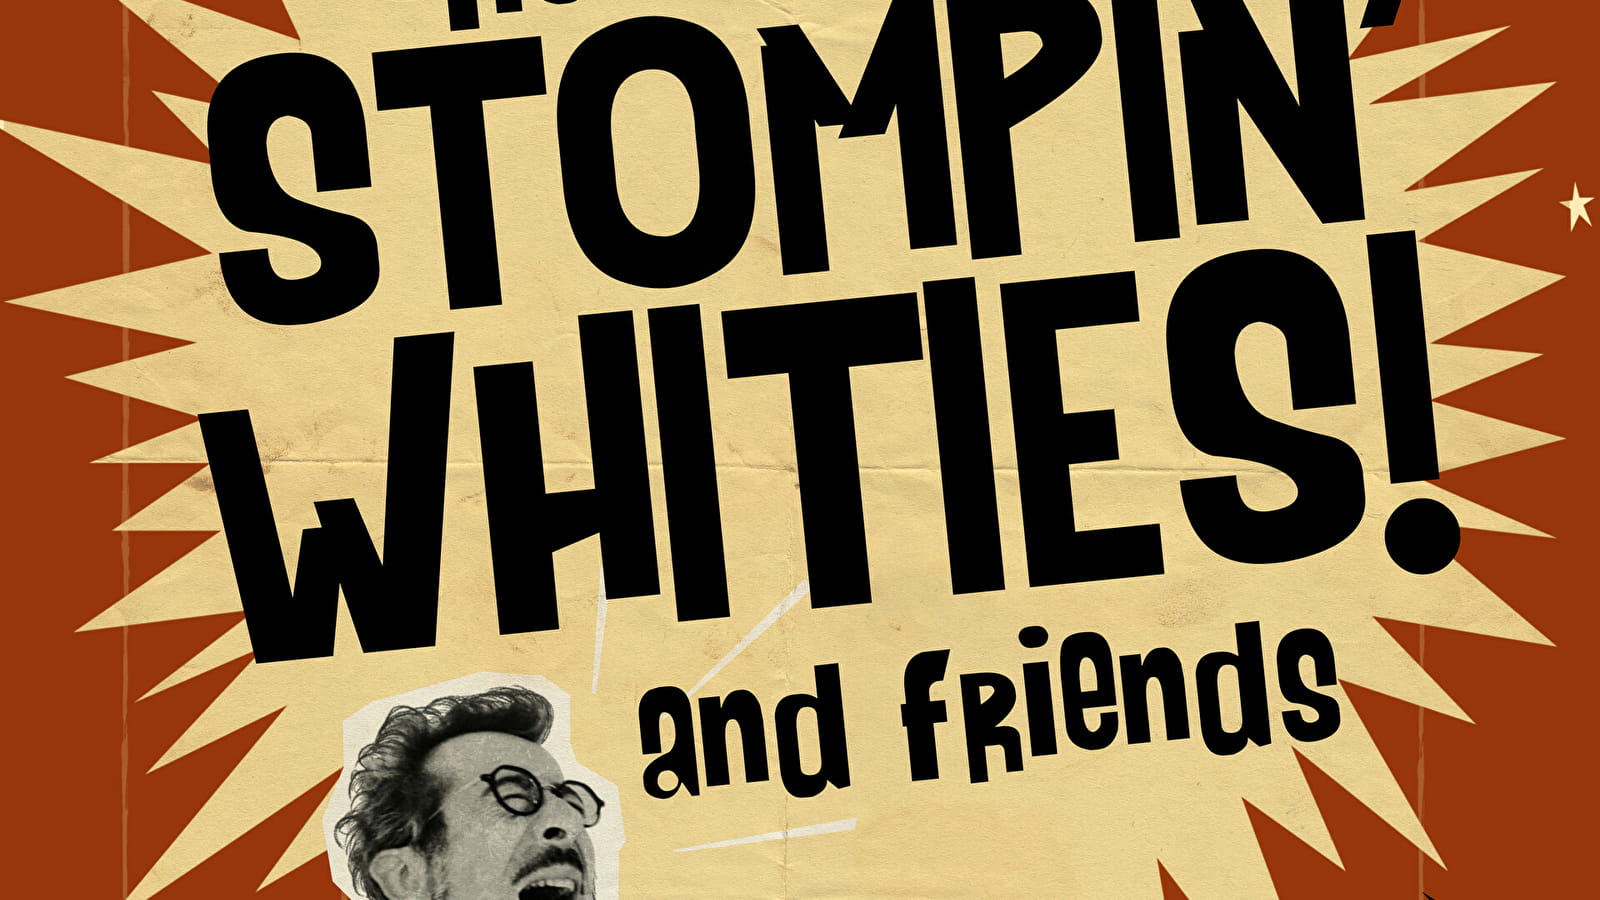 The Stompin’whities and Friends (Is-sur-Tille)